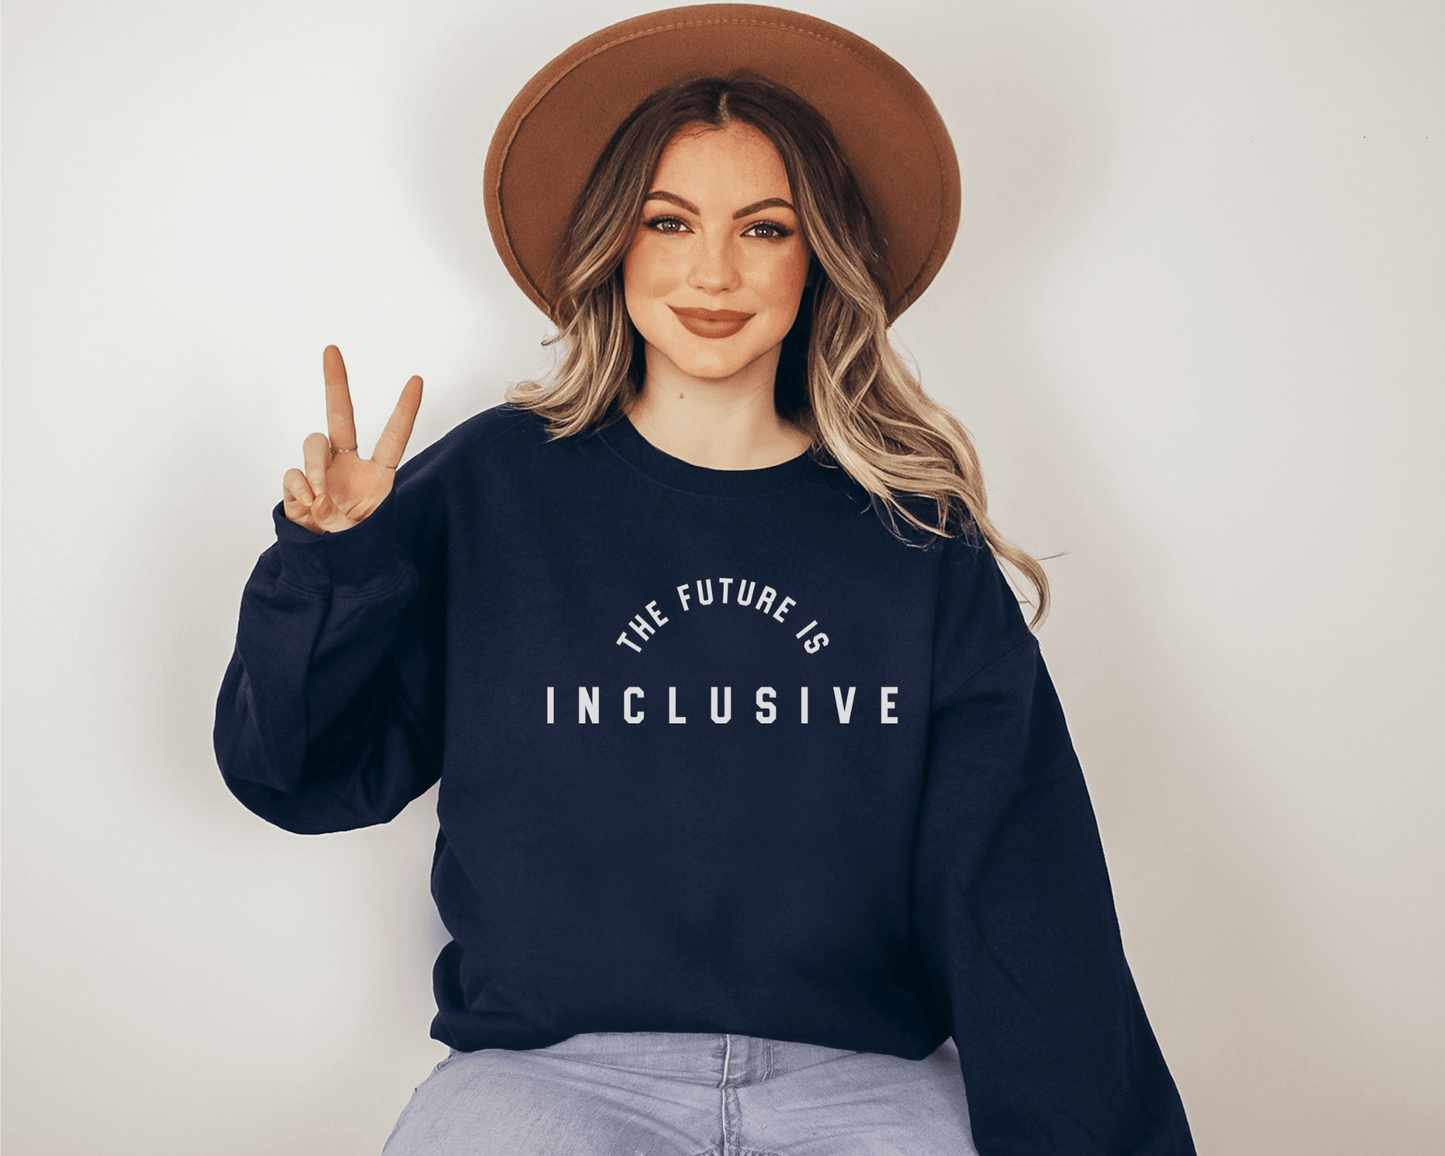 The Future is Inclusive Sweatshirt in Navy on a female model.